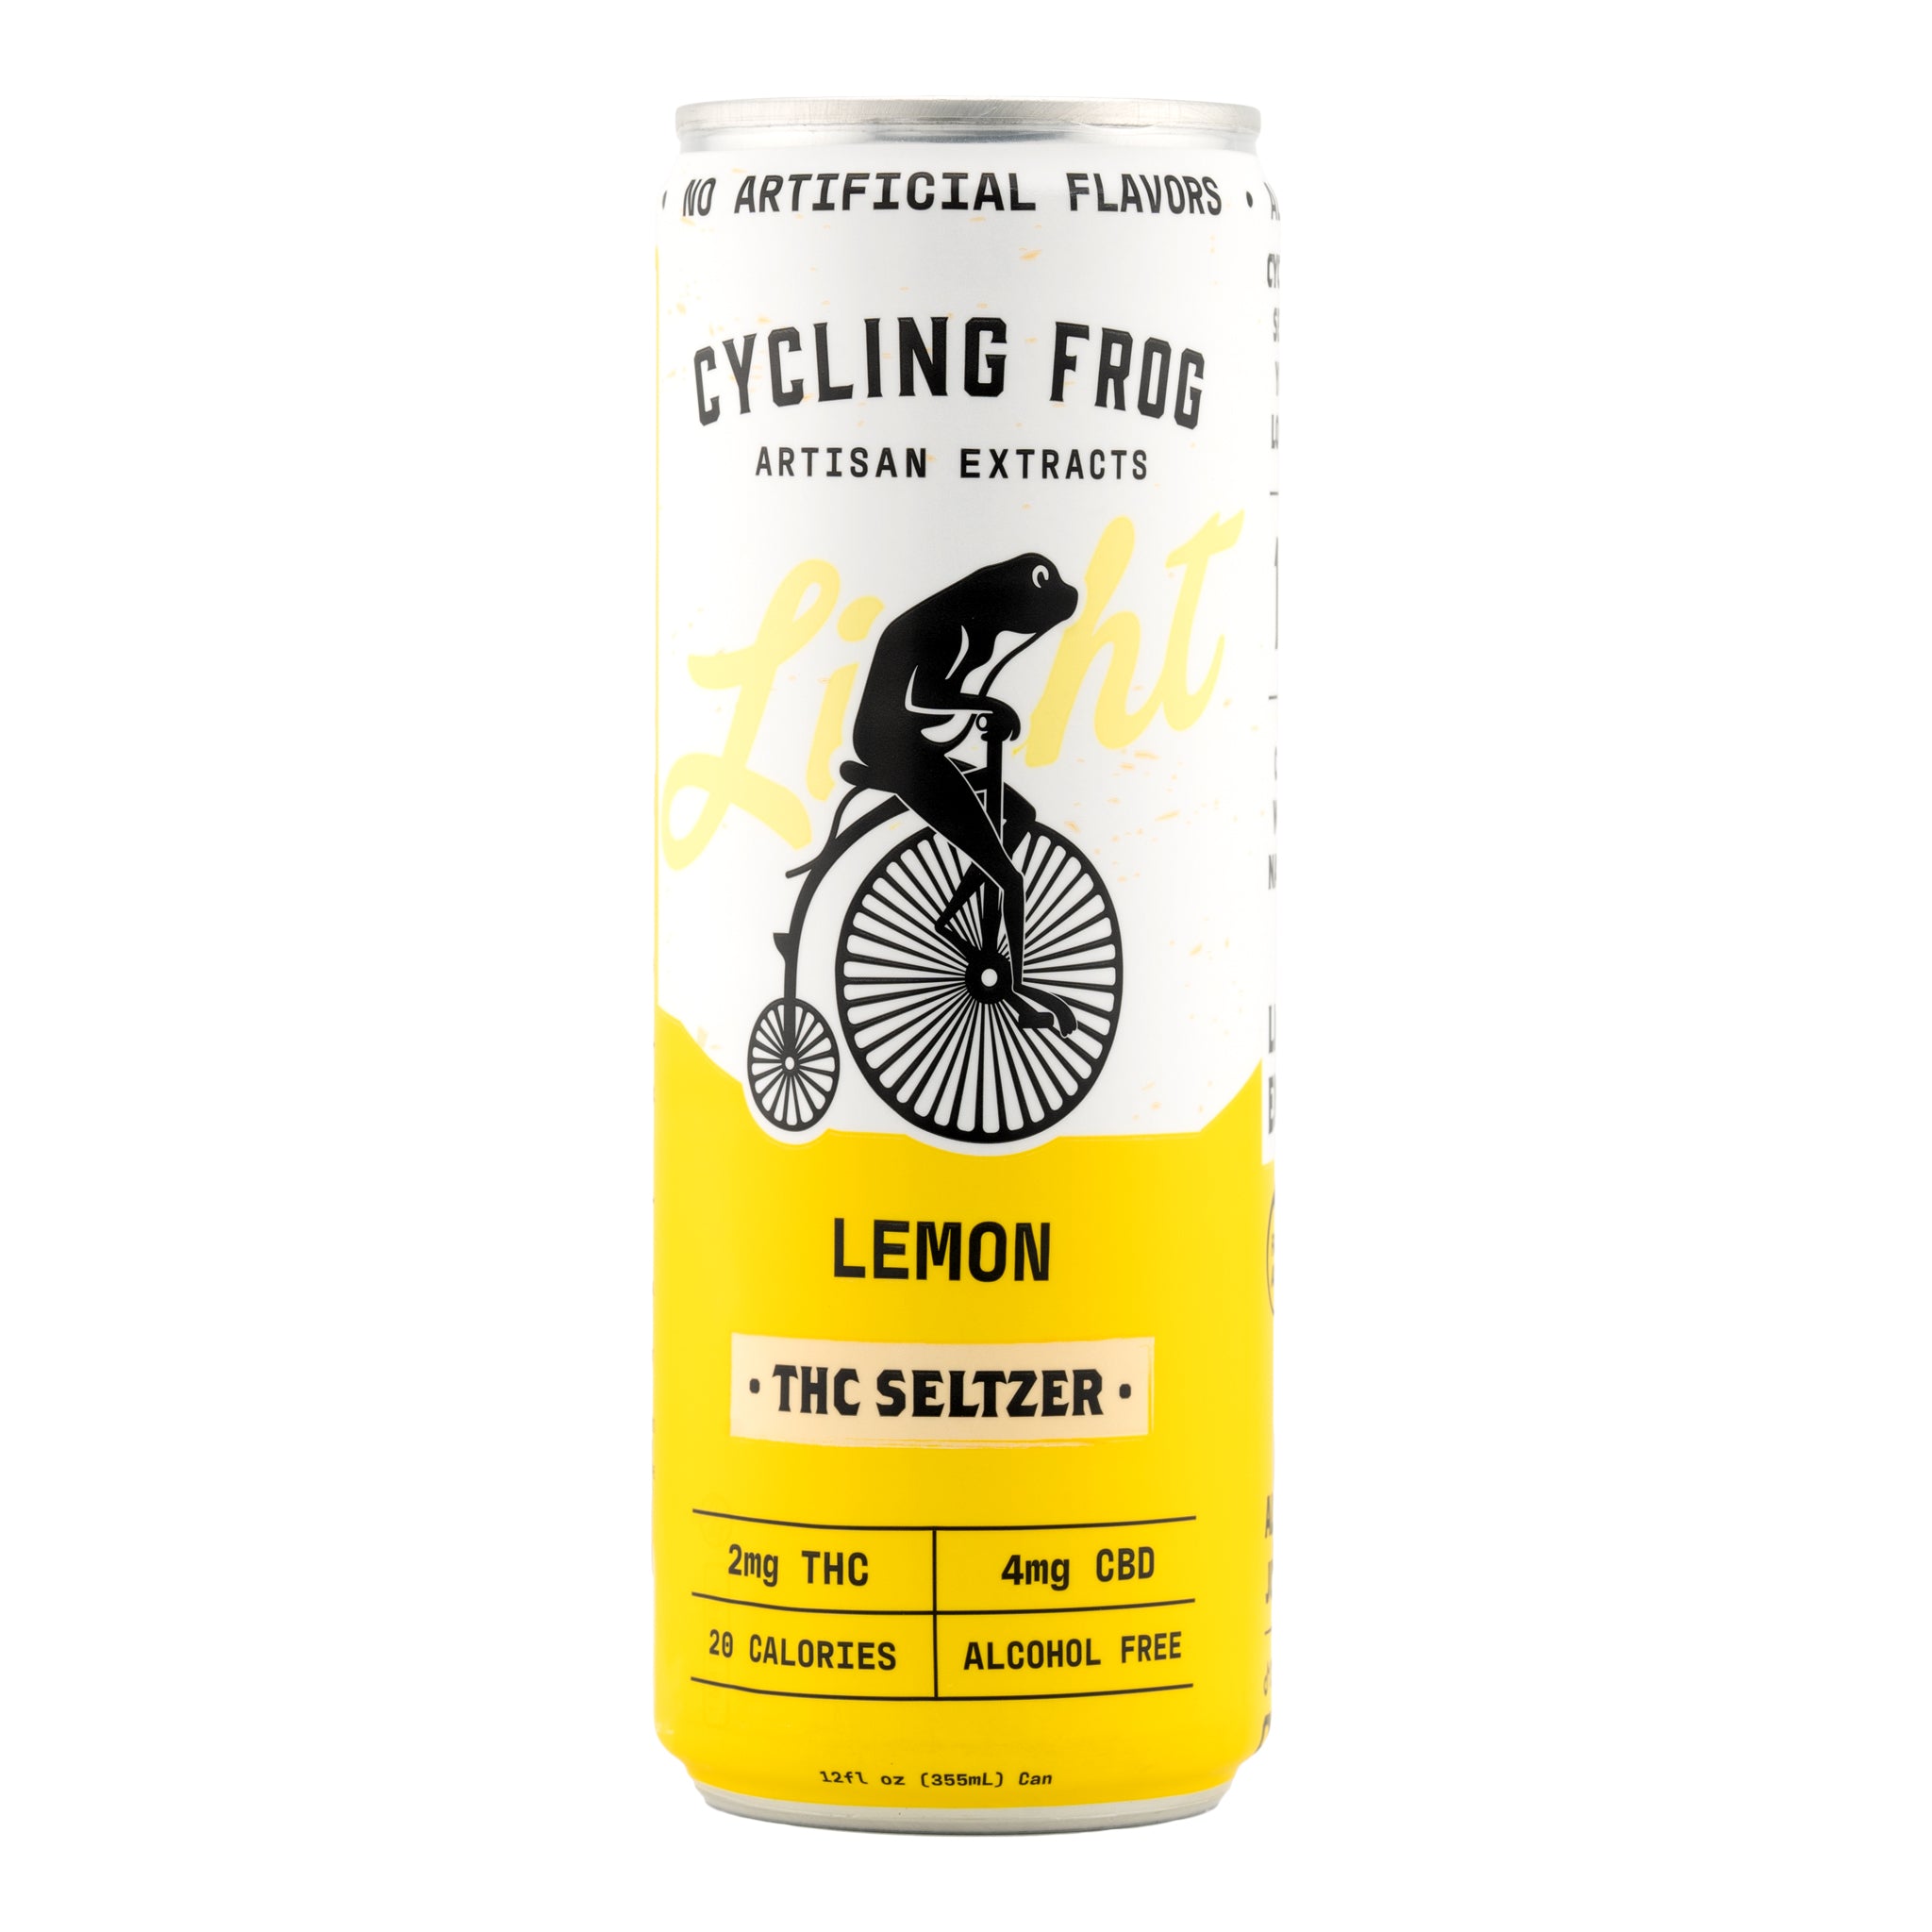 CYCLING FROG Light Seltzer 2mg THC (2 Flavors)